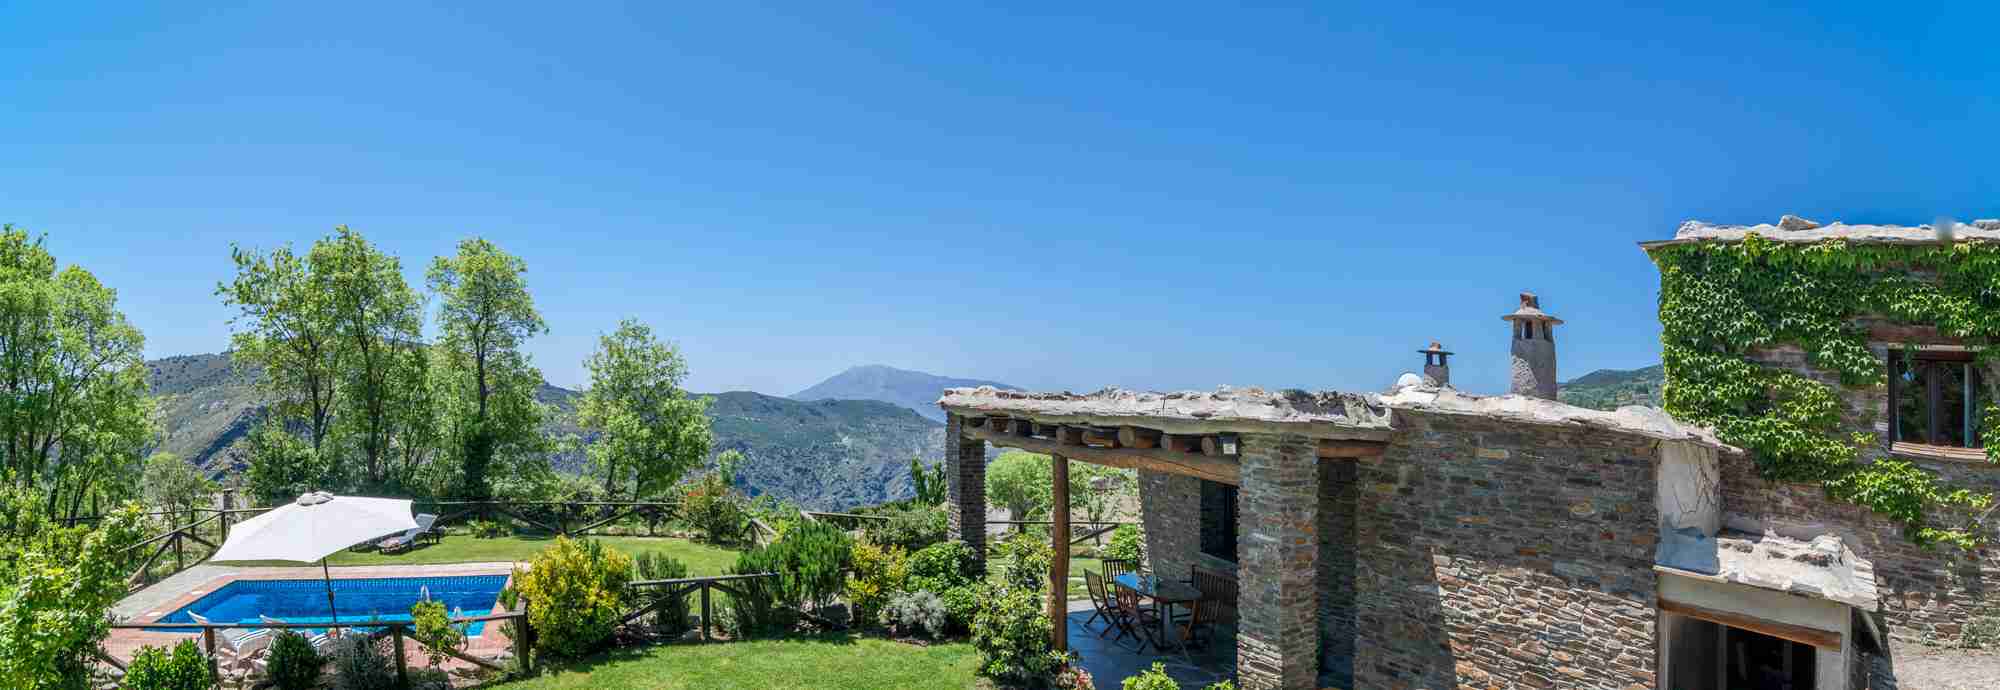 Garden villa with pool and views in a secluded Alpujarras mountain location